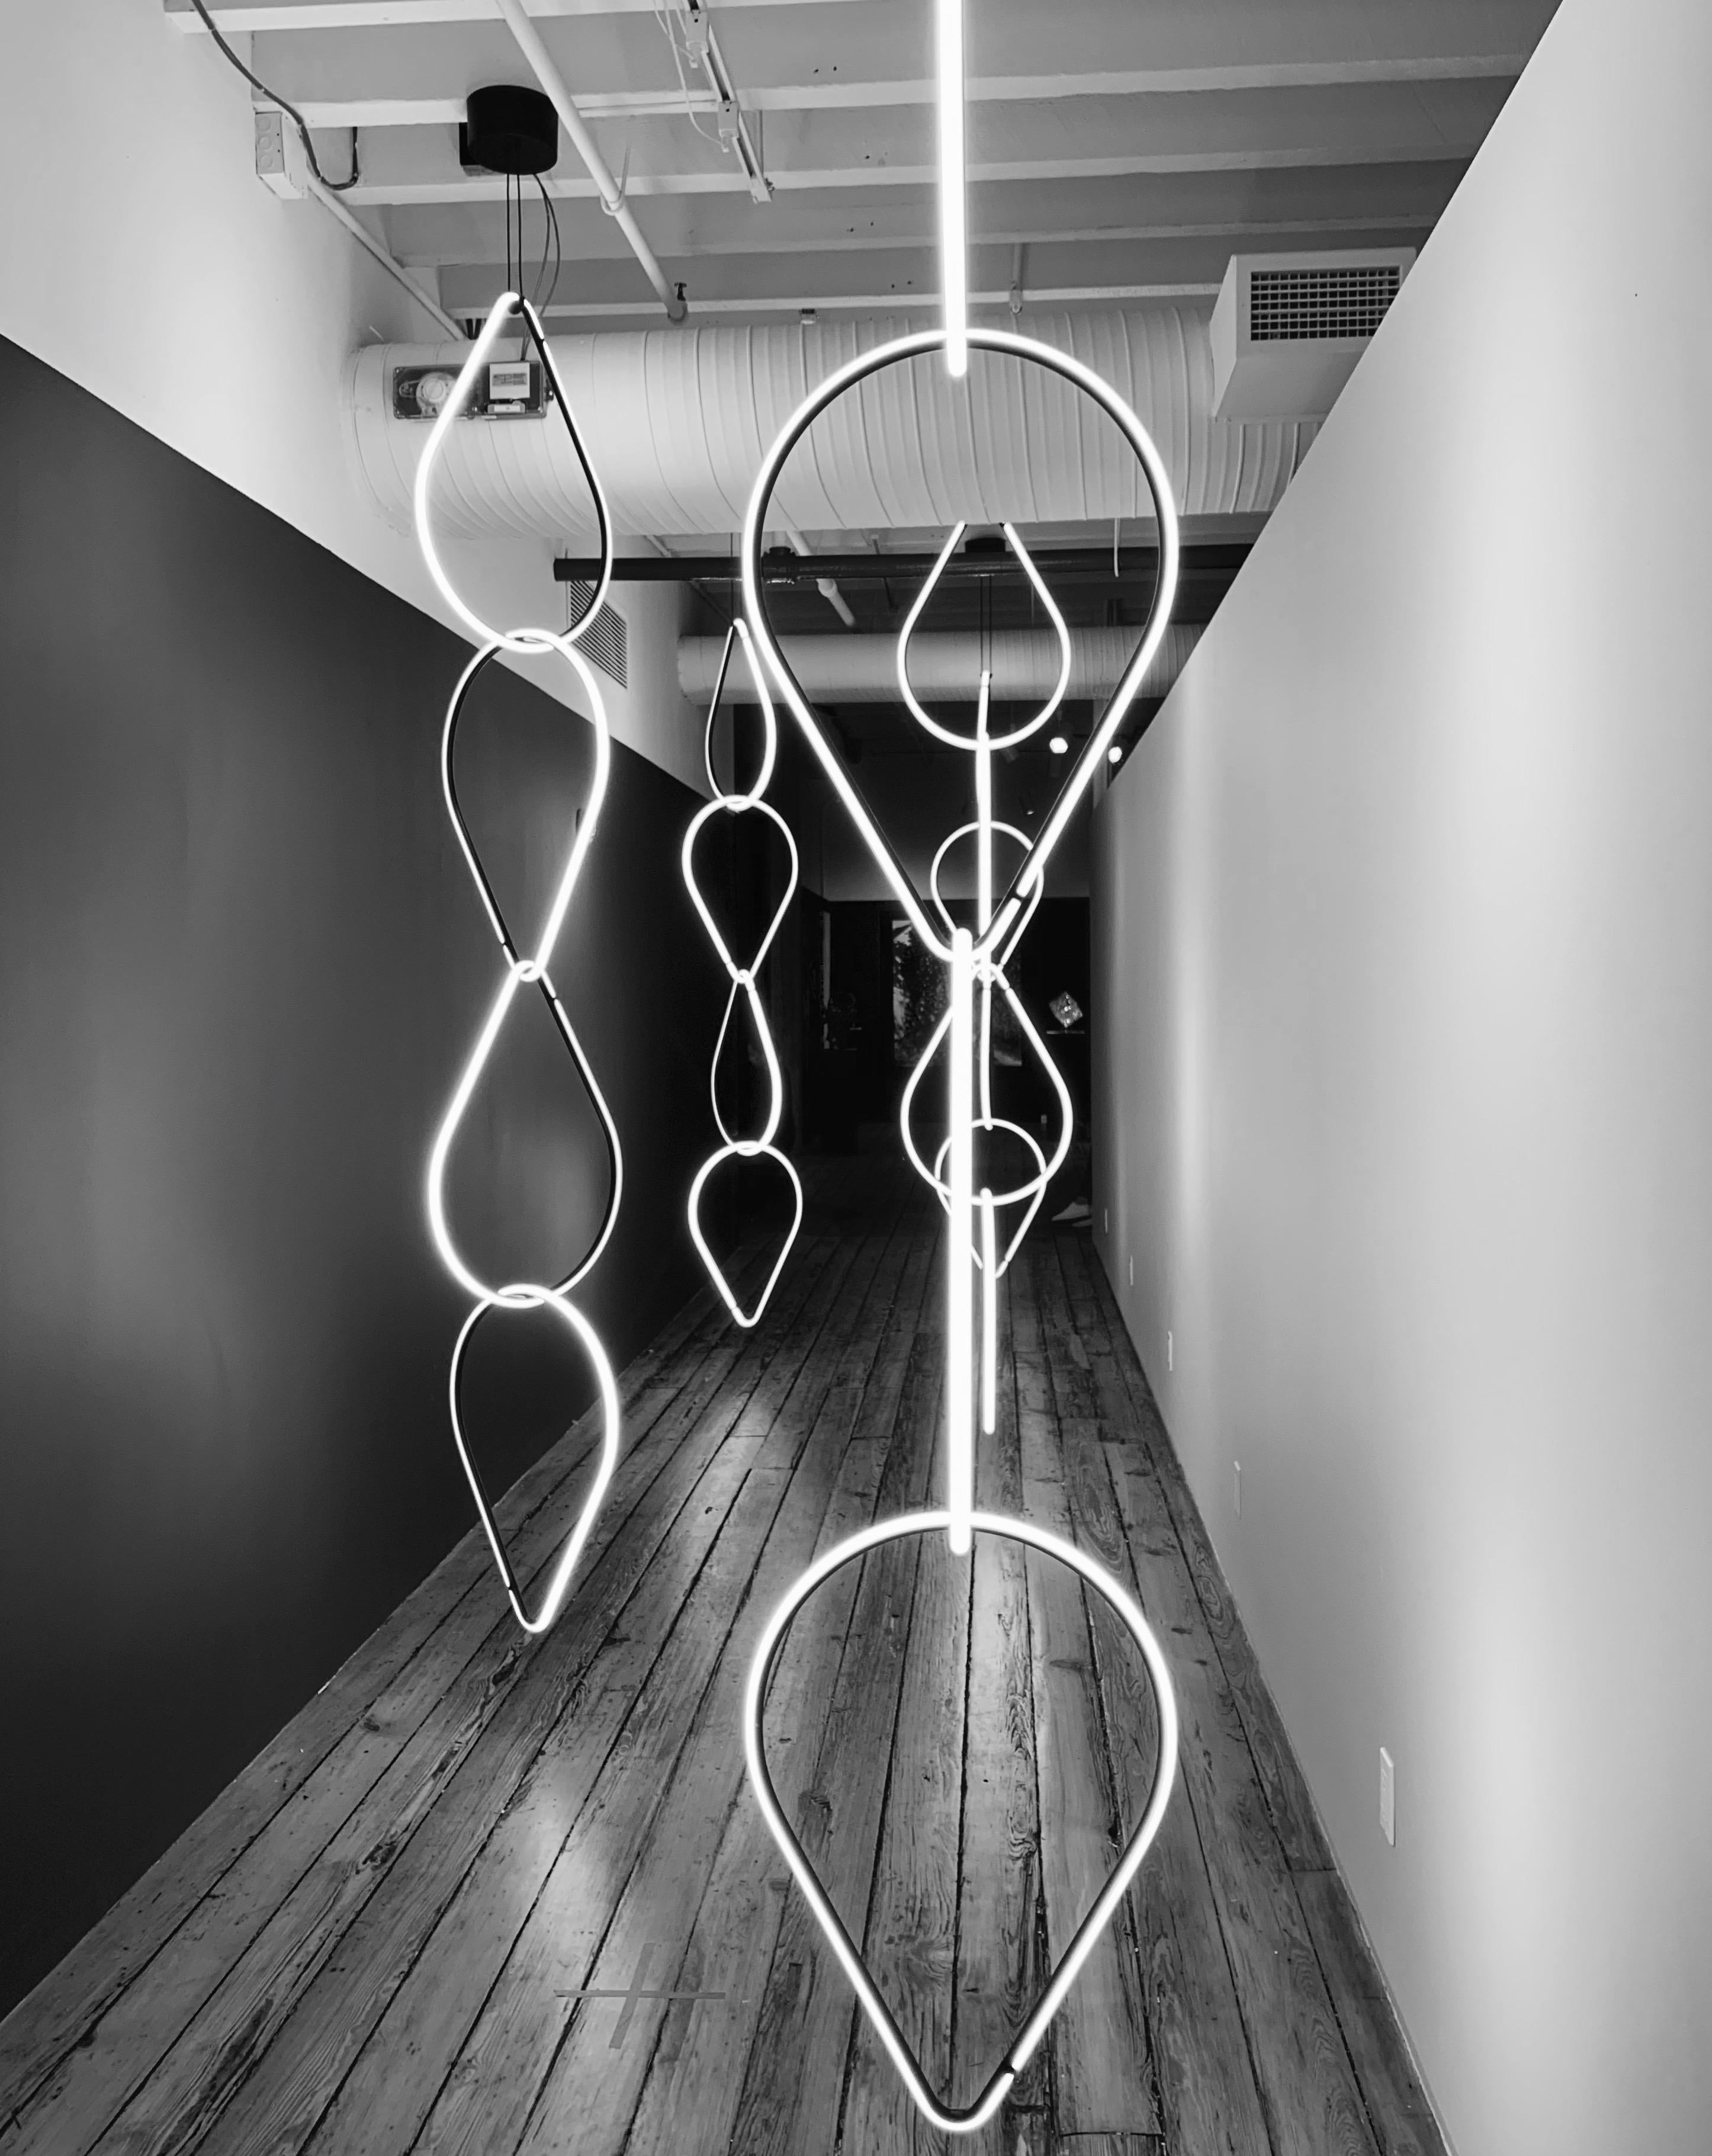 Arrangements is a modular system of geometric light elements that can be combined in different ways, creating multiple compositions into individual chandeliers. Each unit simply attaches onto the previous one as if resting, balancing perfectly as a